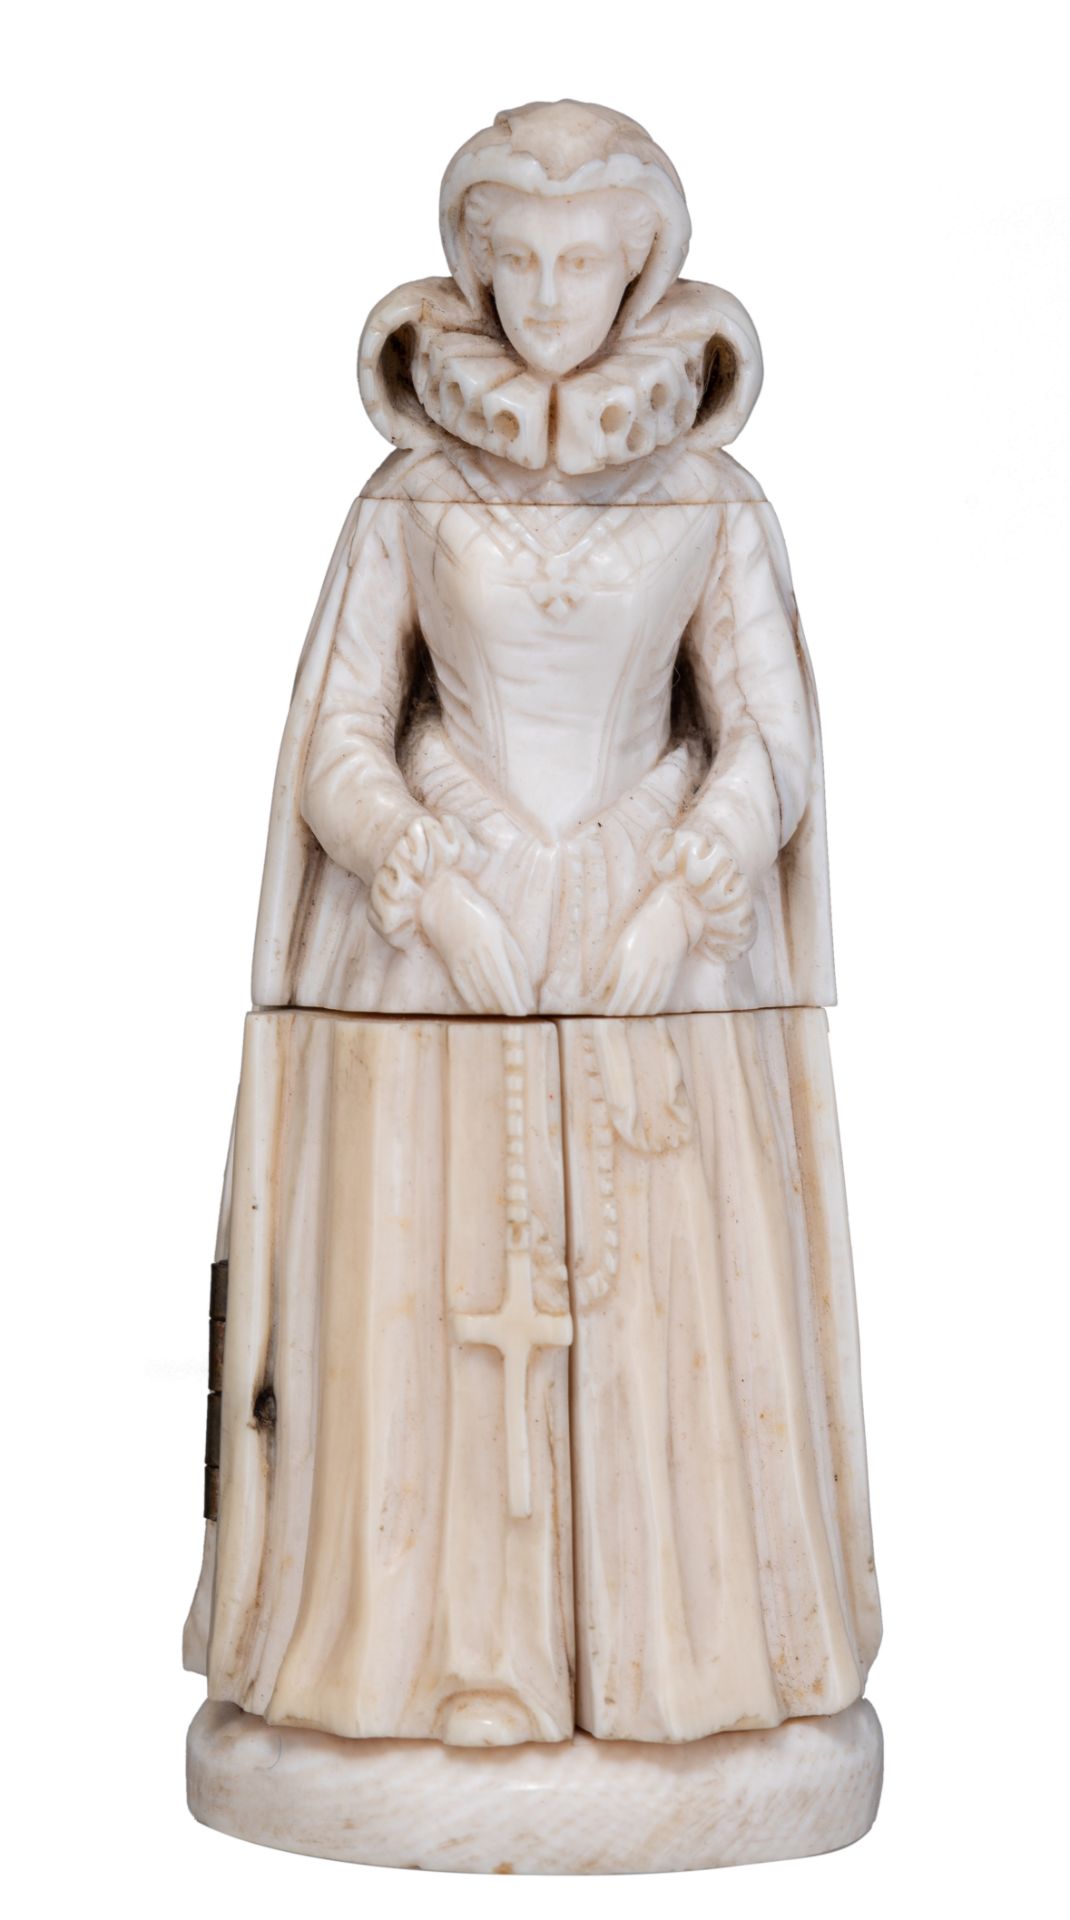 Four 19thC small Dieppe or Paris ivory figures, three on a wooden base, H 7,7 - 16,5 cm - Image 17 of 51